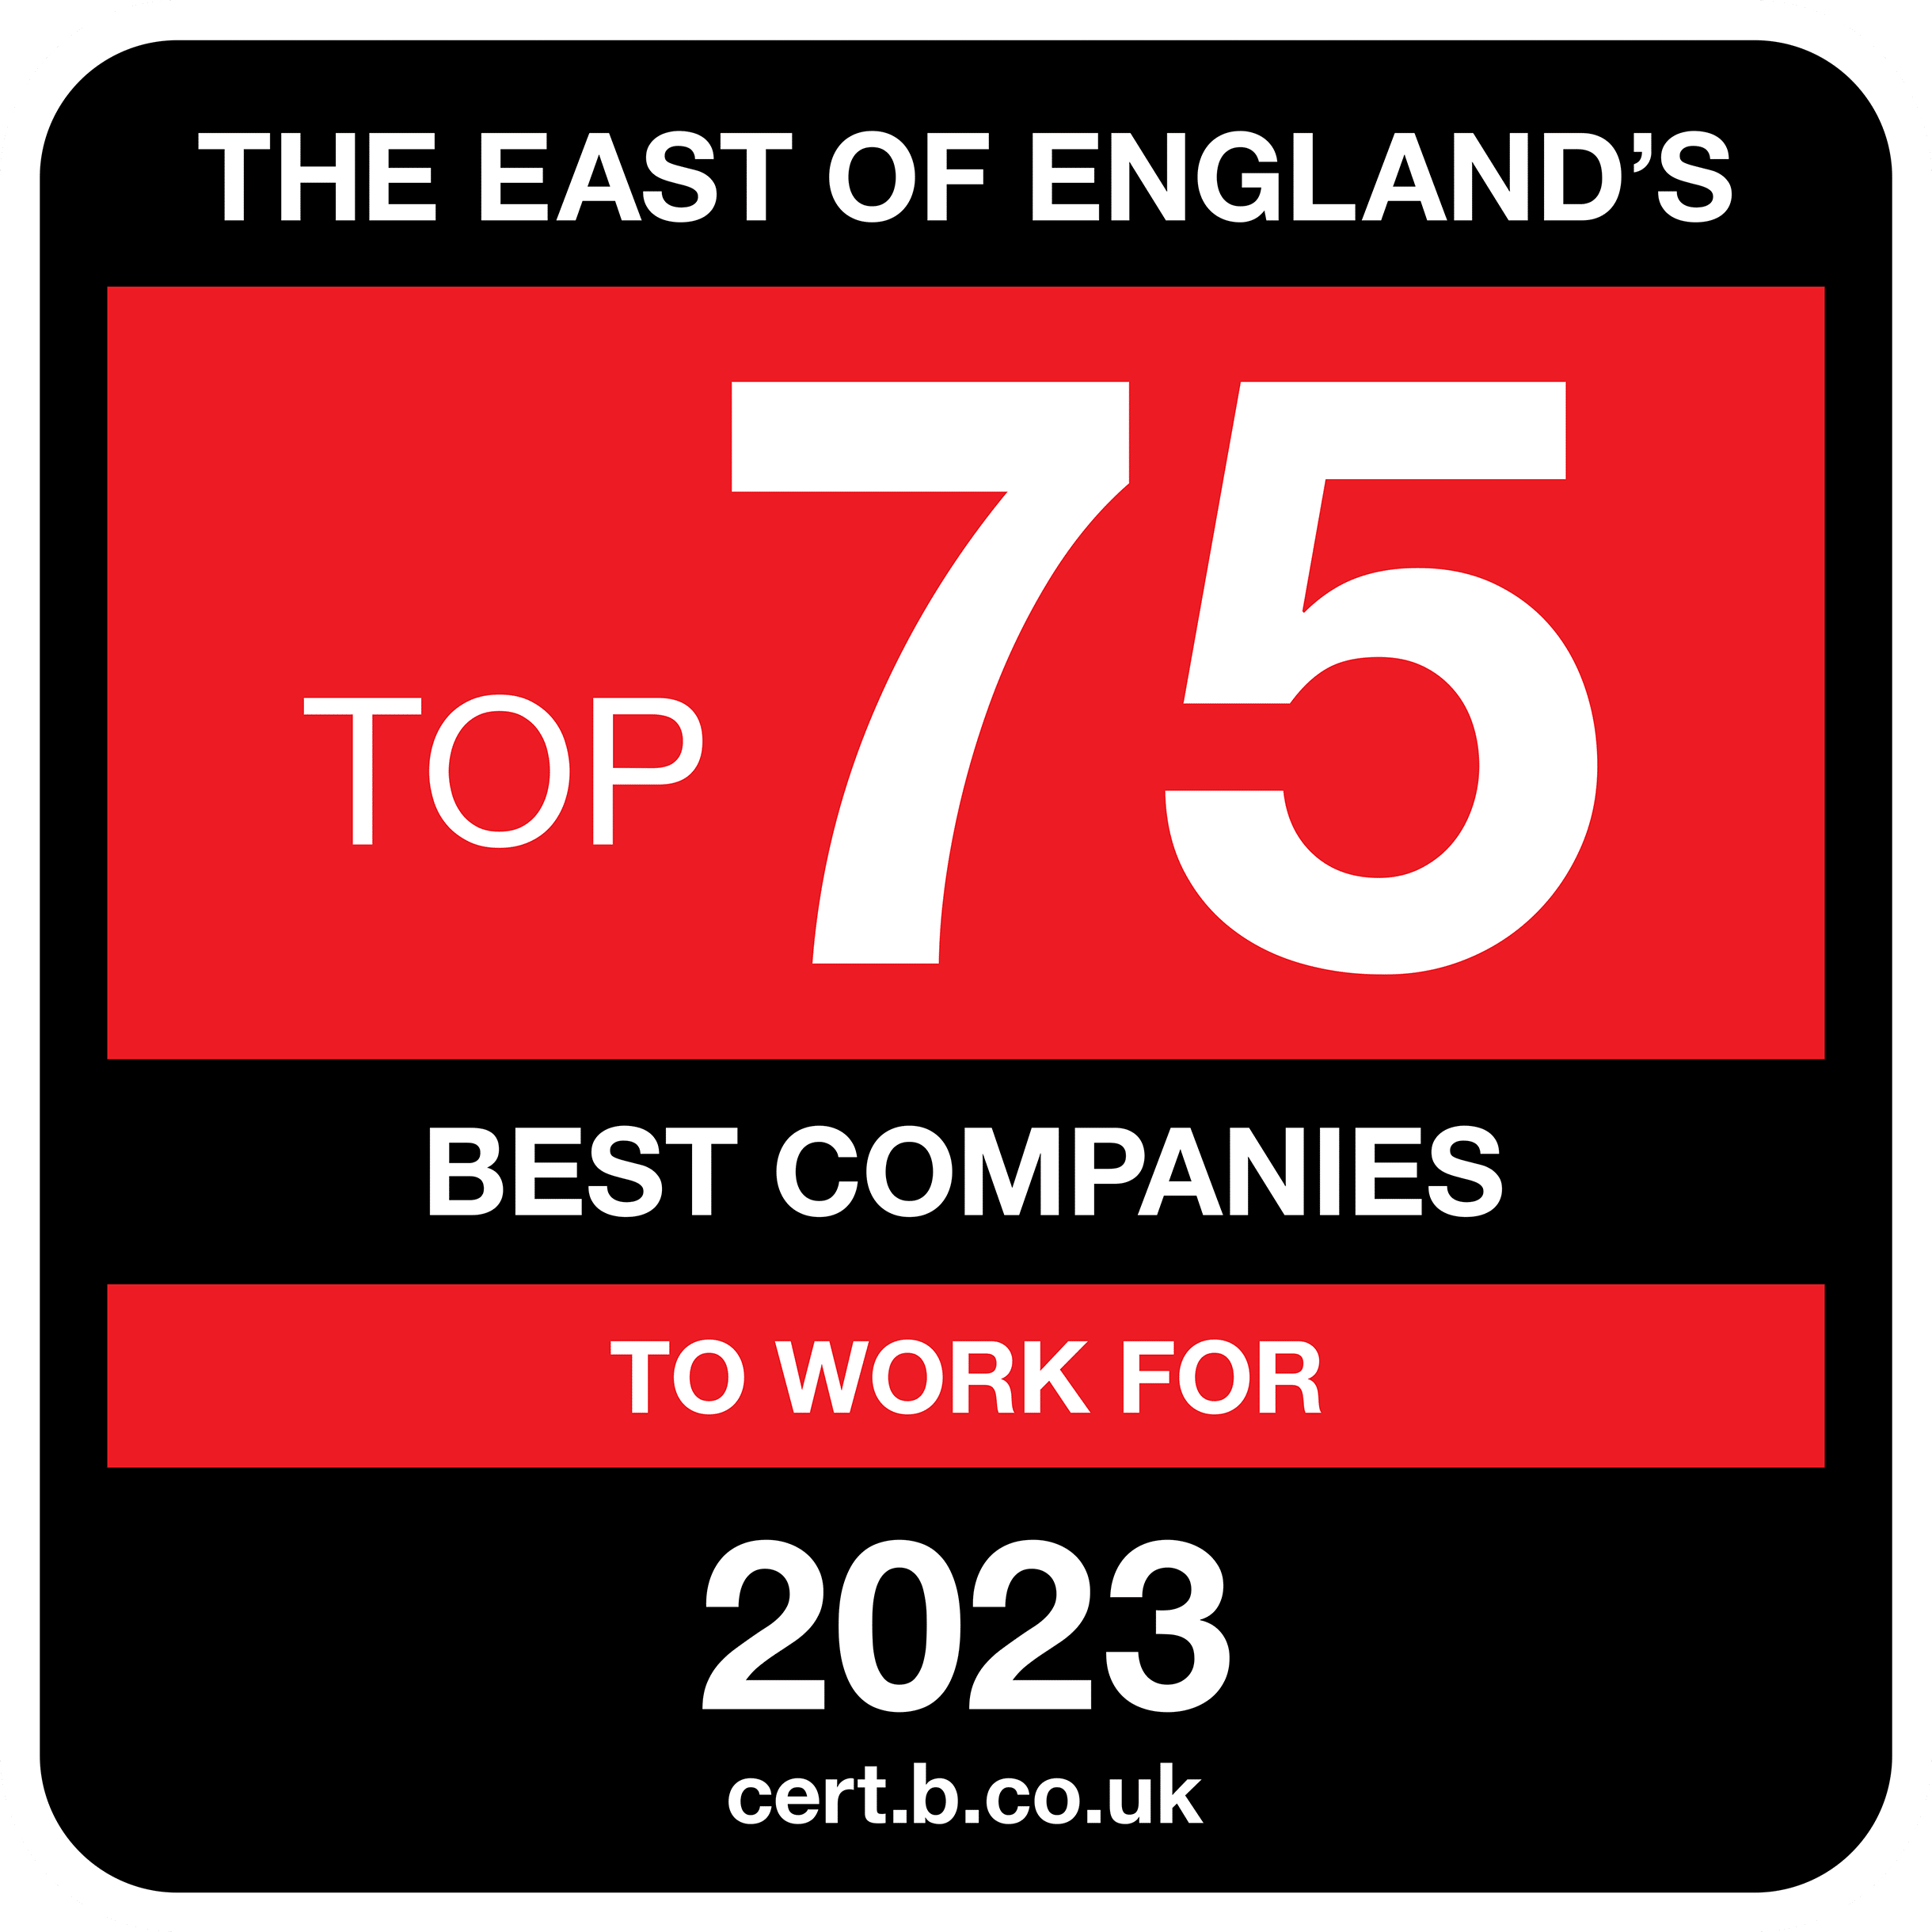 The East of England's Best Companies to work for 2023